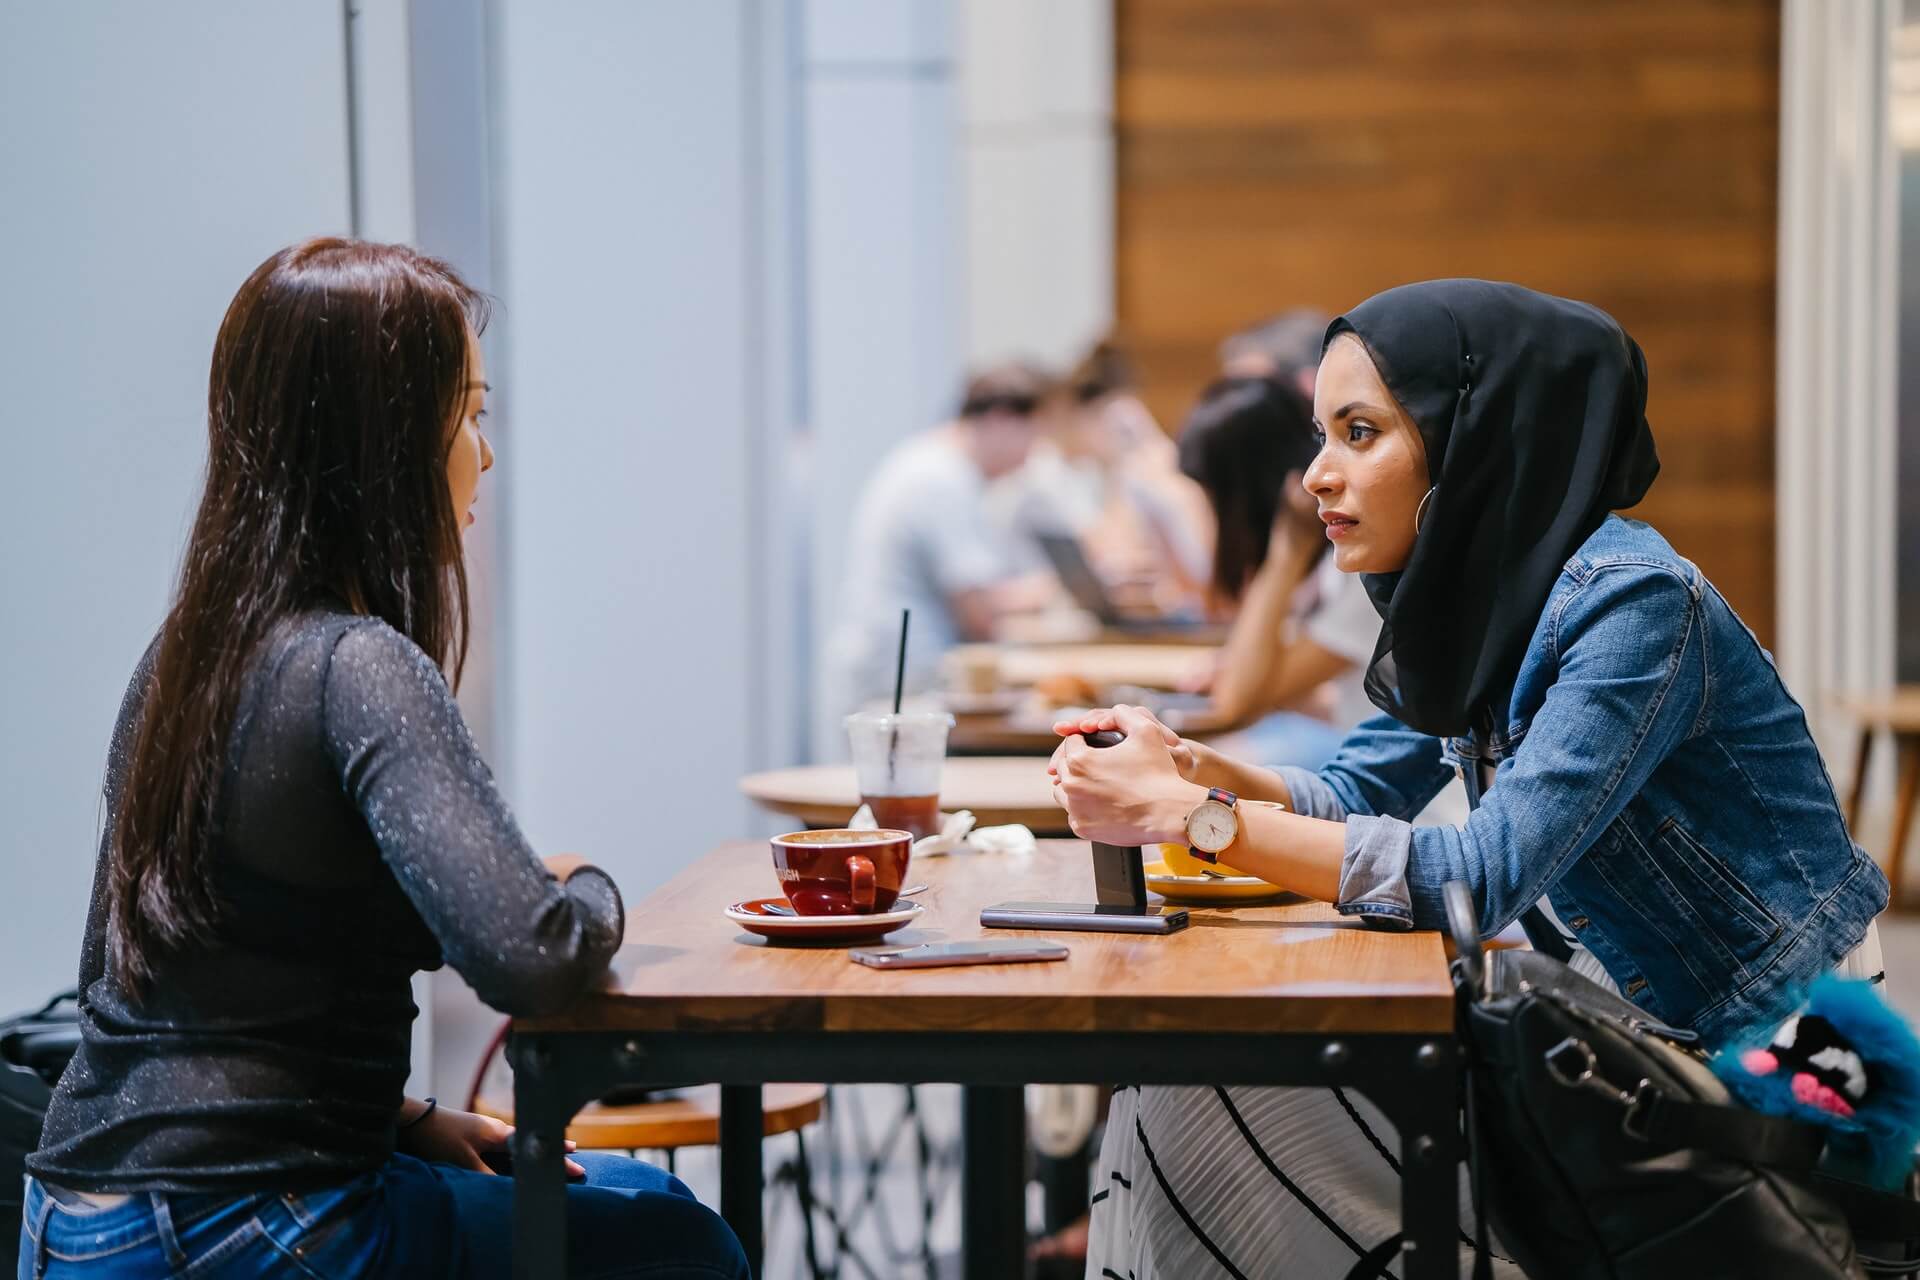 Two women sit on either side of a wooden table having coffee together. One woman is wearing a black headscarf while the other woman has long brown hair which is down